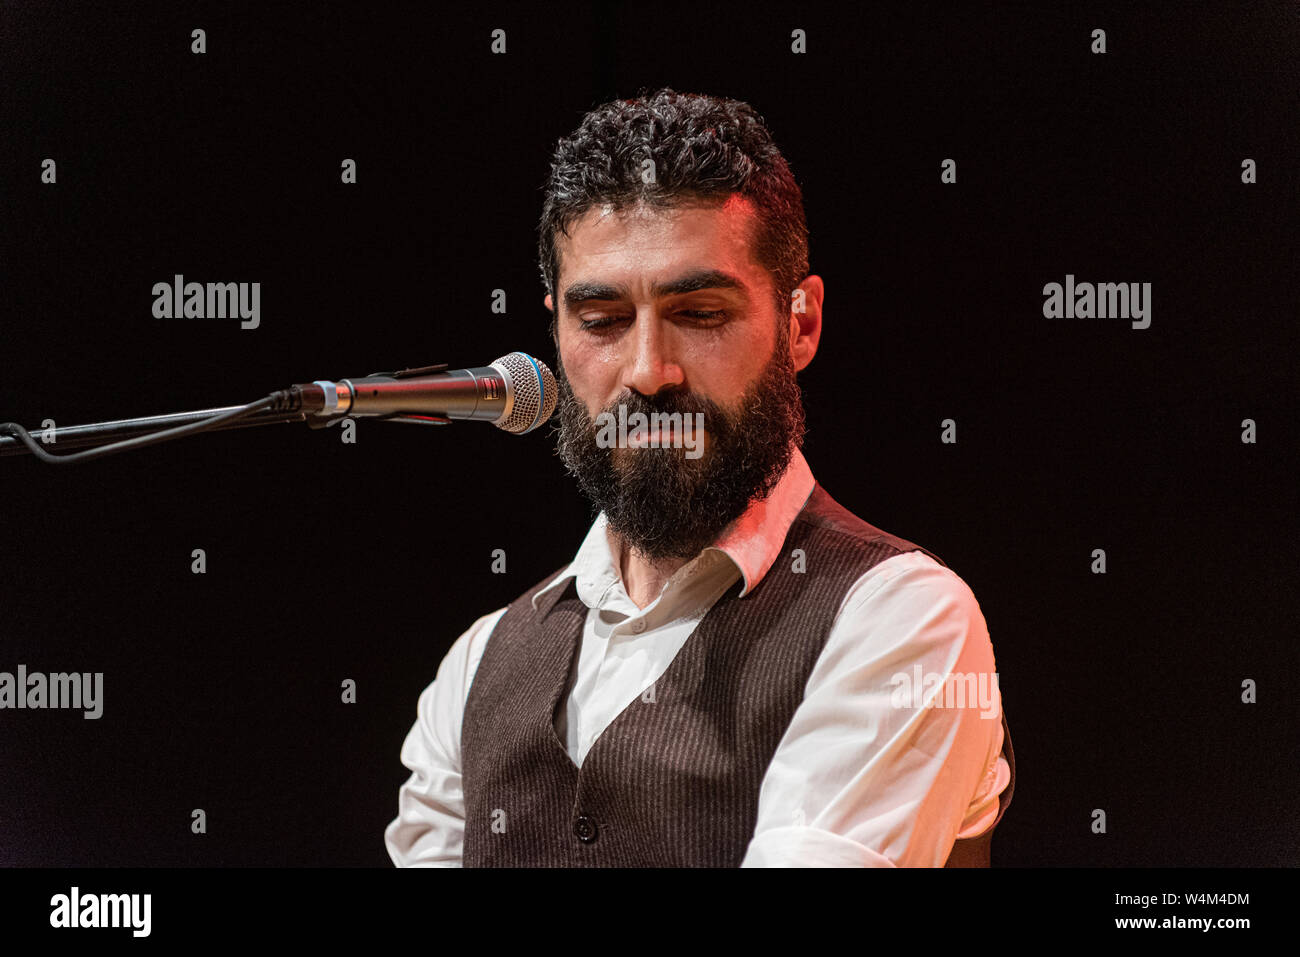 Good-looking man with thick black beard, musician plays on stage Stock Photo